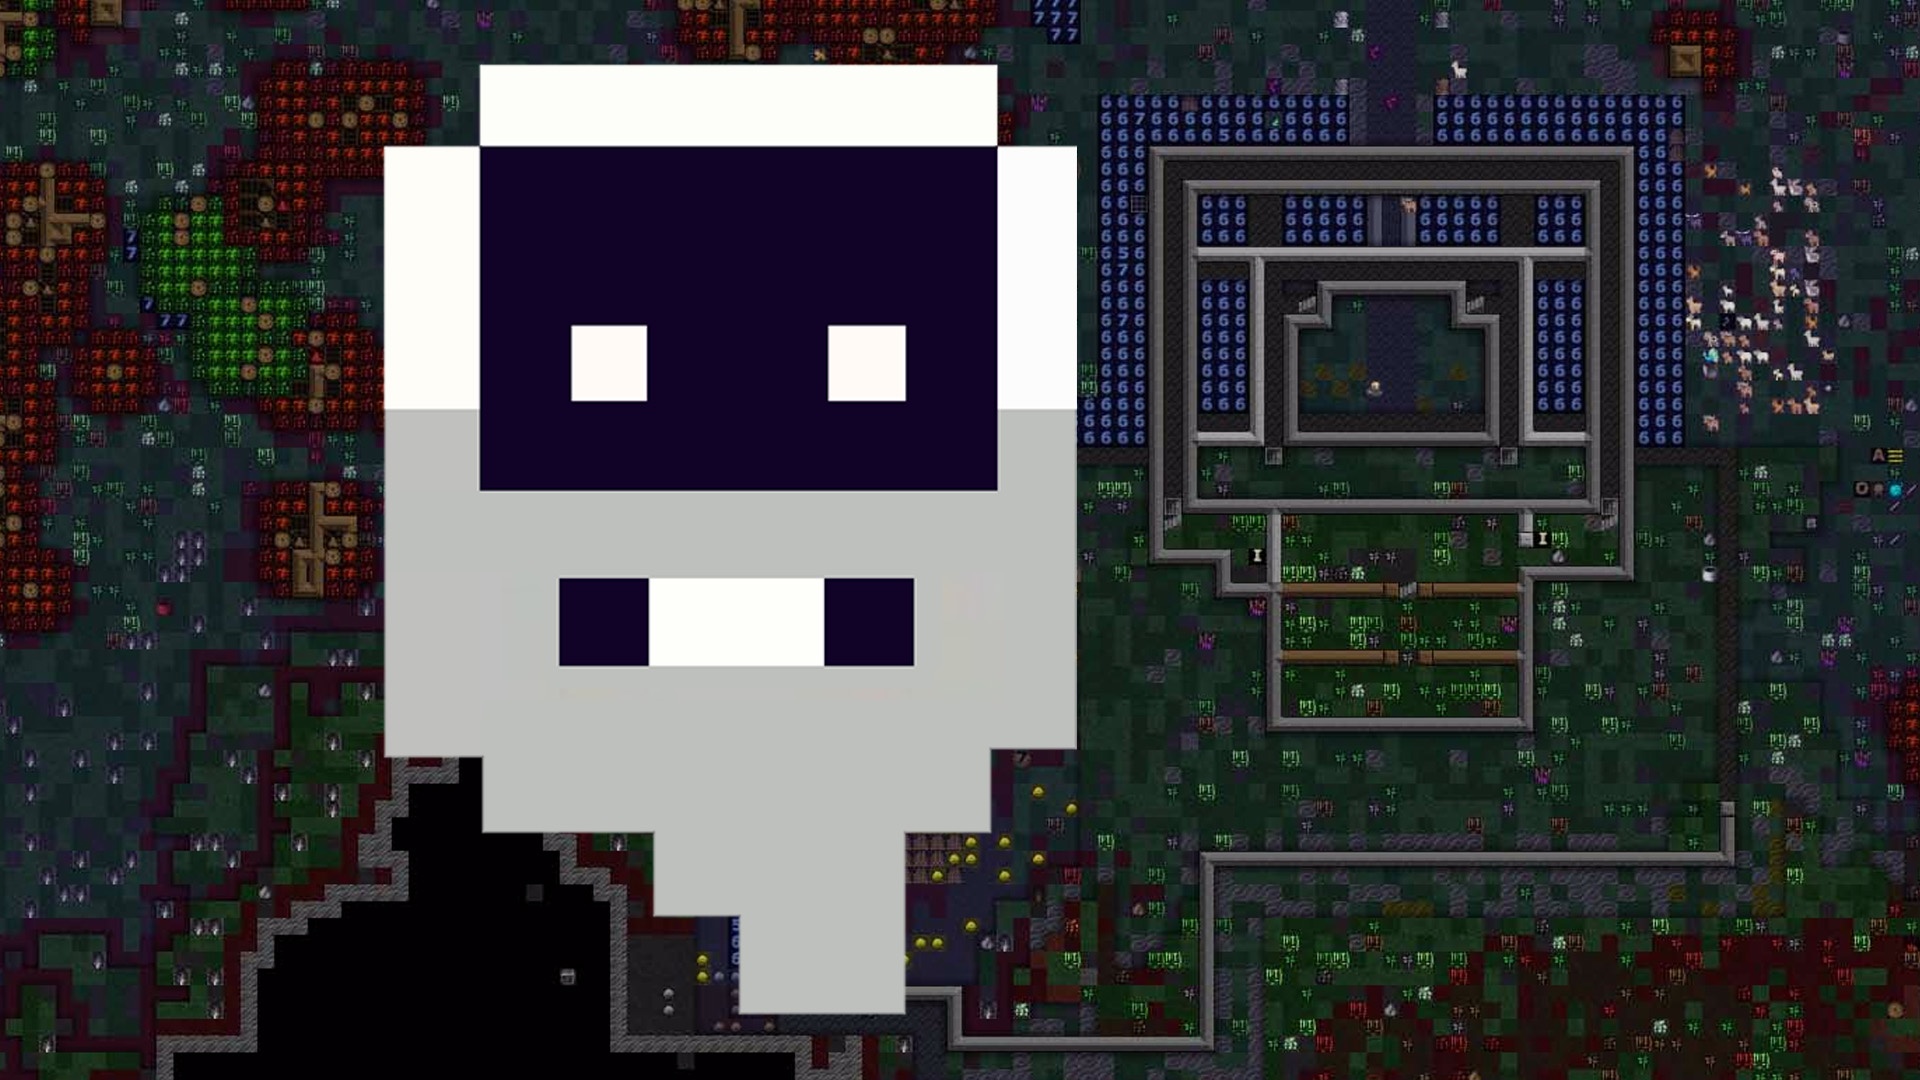 Dwarf Fortress: Mouse control could make it a construction hit